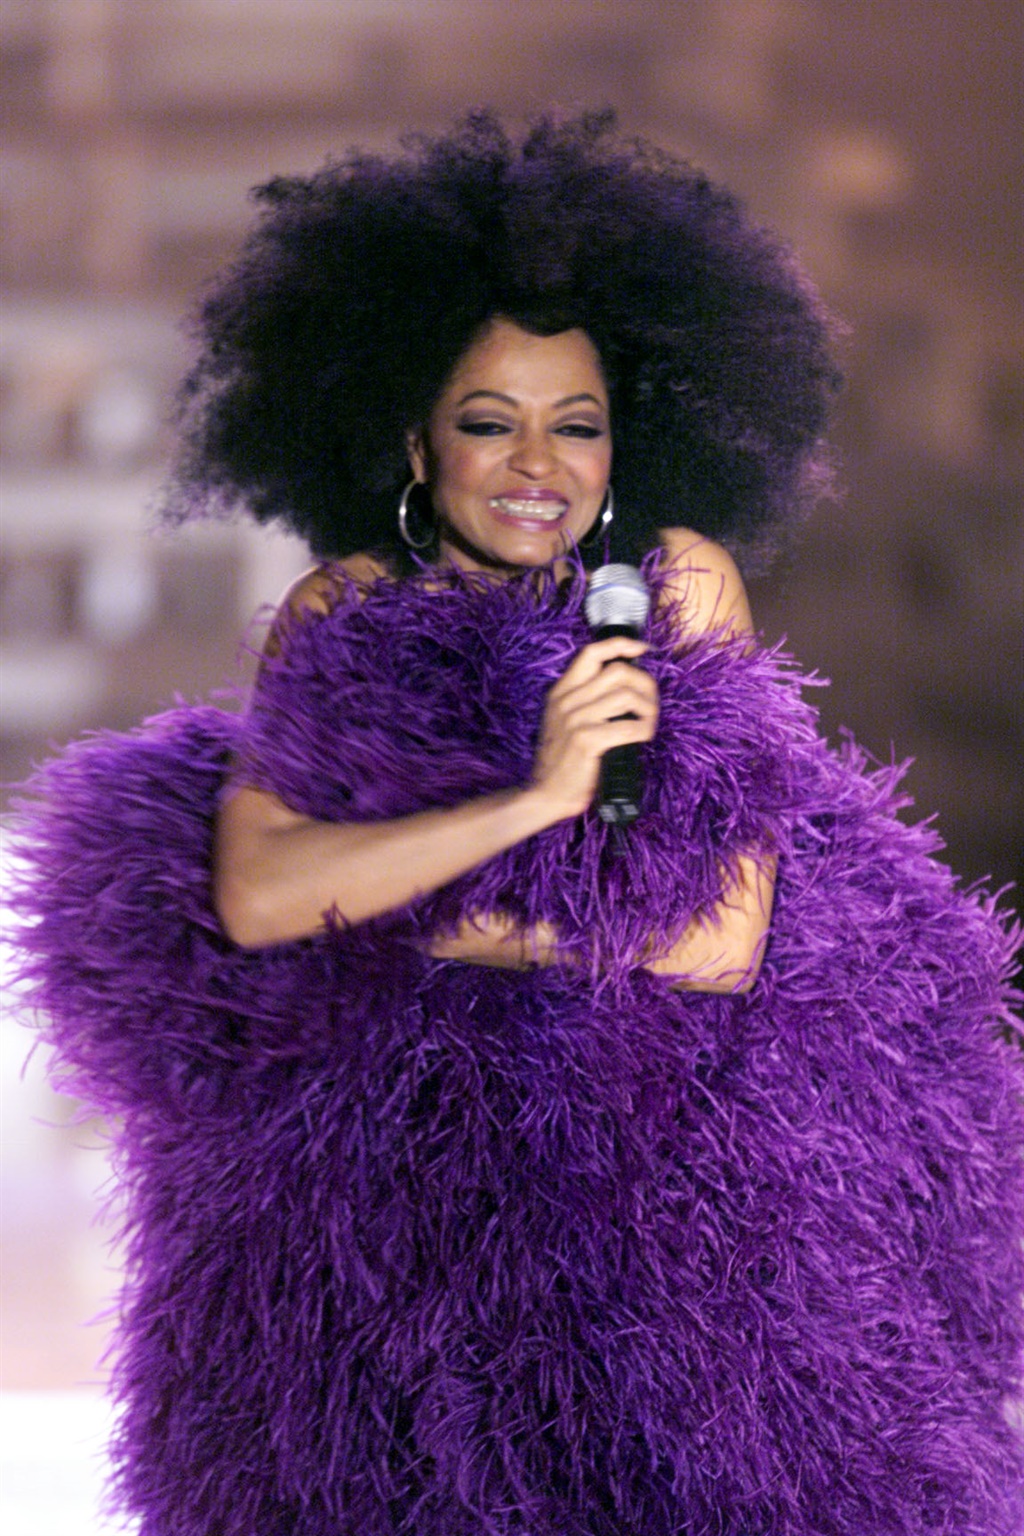 Diana Ross style icon